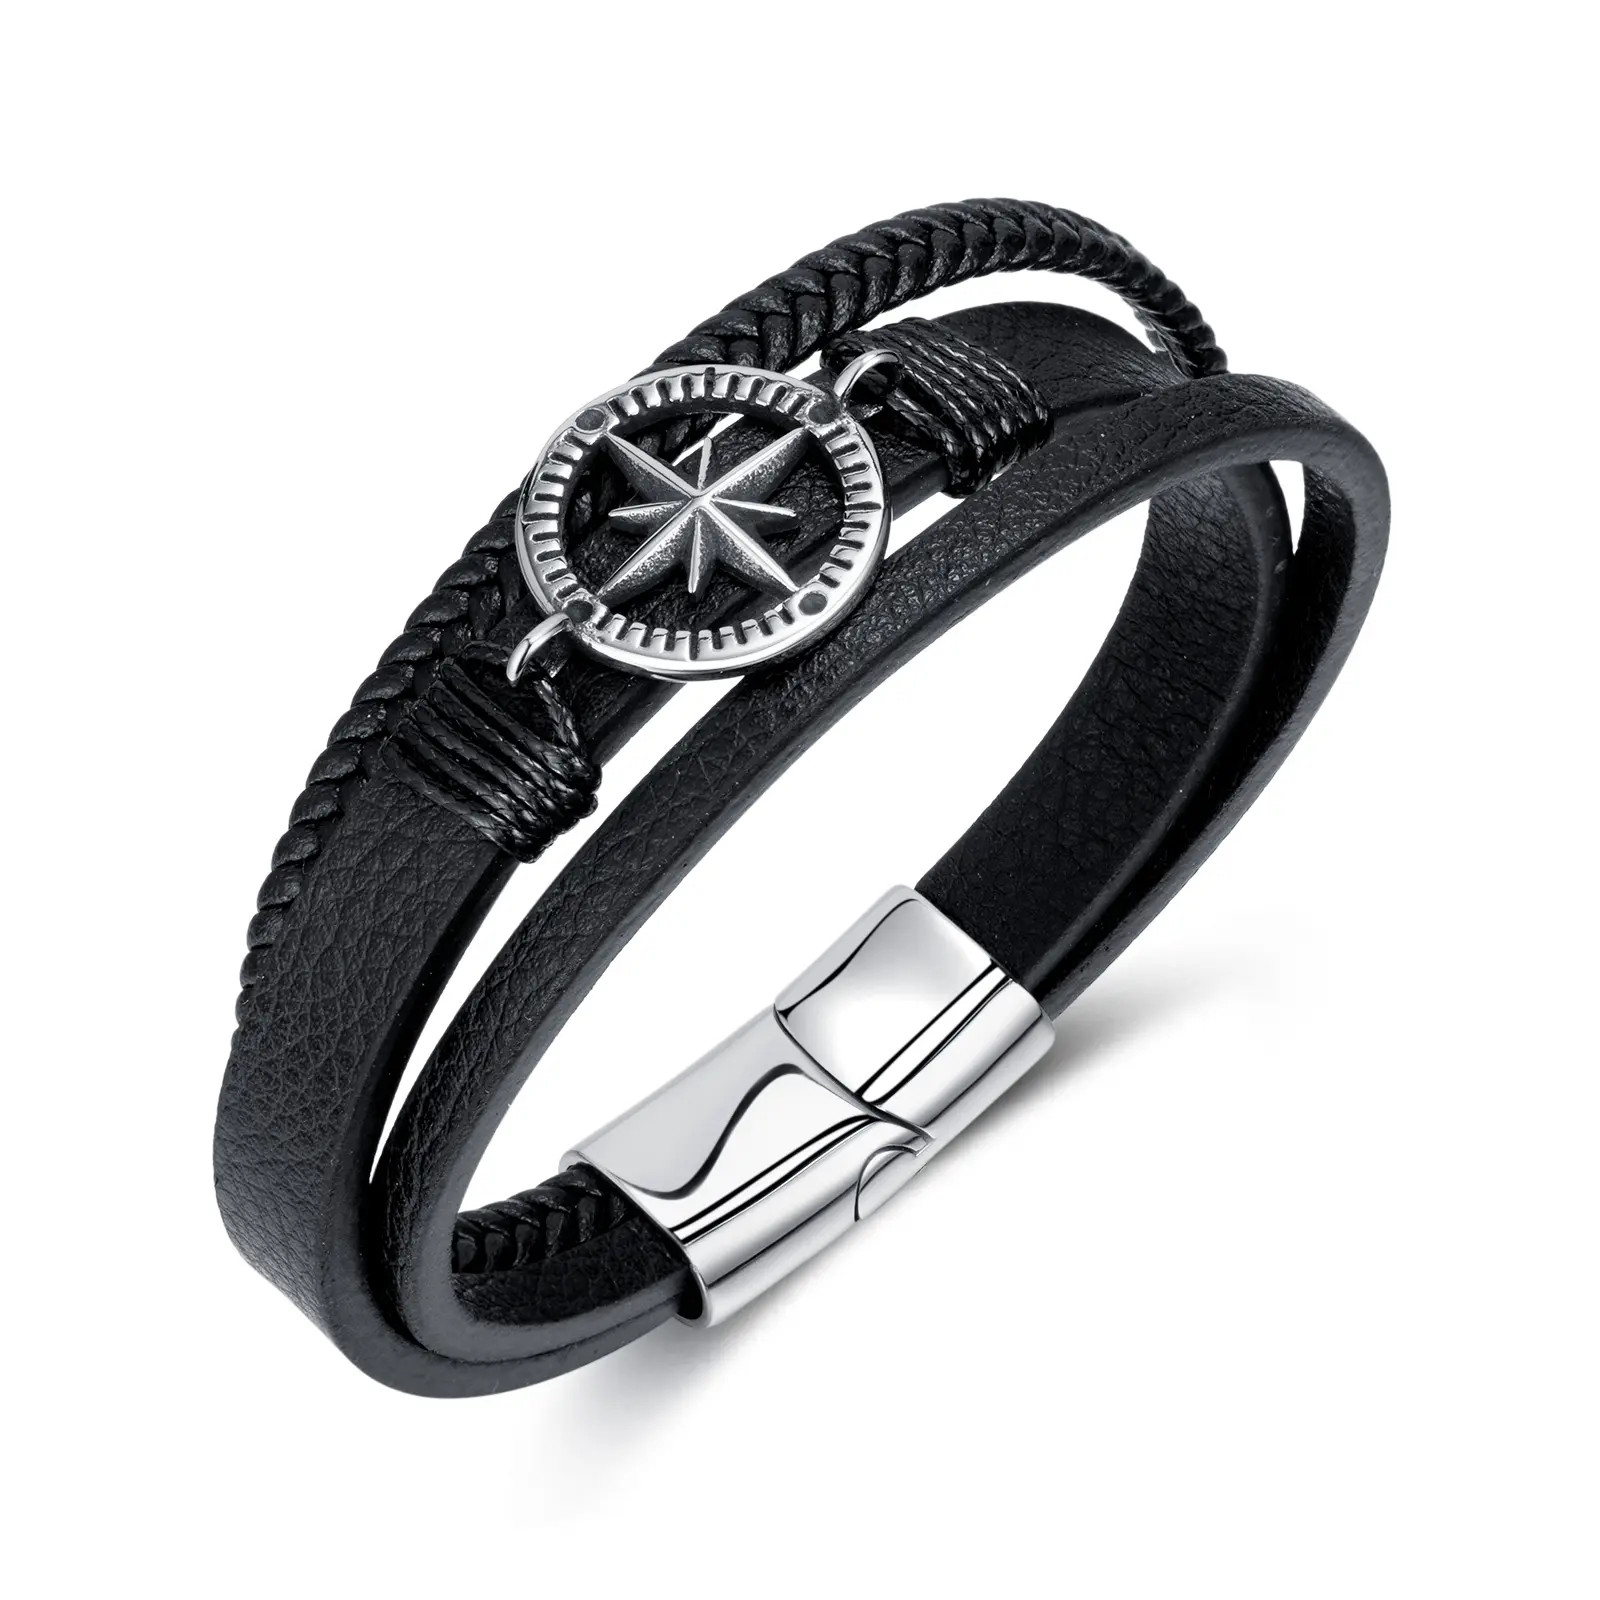 New Fashion Punk Multilayer Design jewelry trendy Braided leather bracelet for men